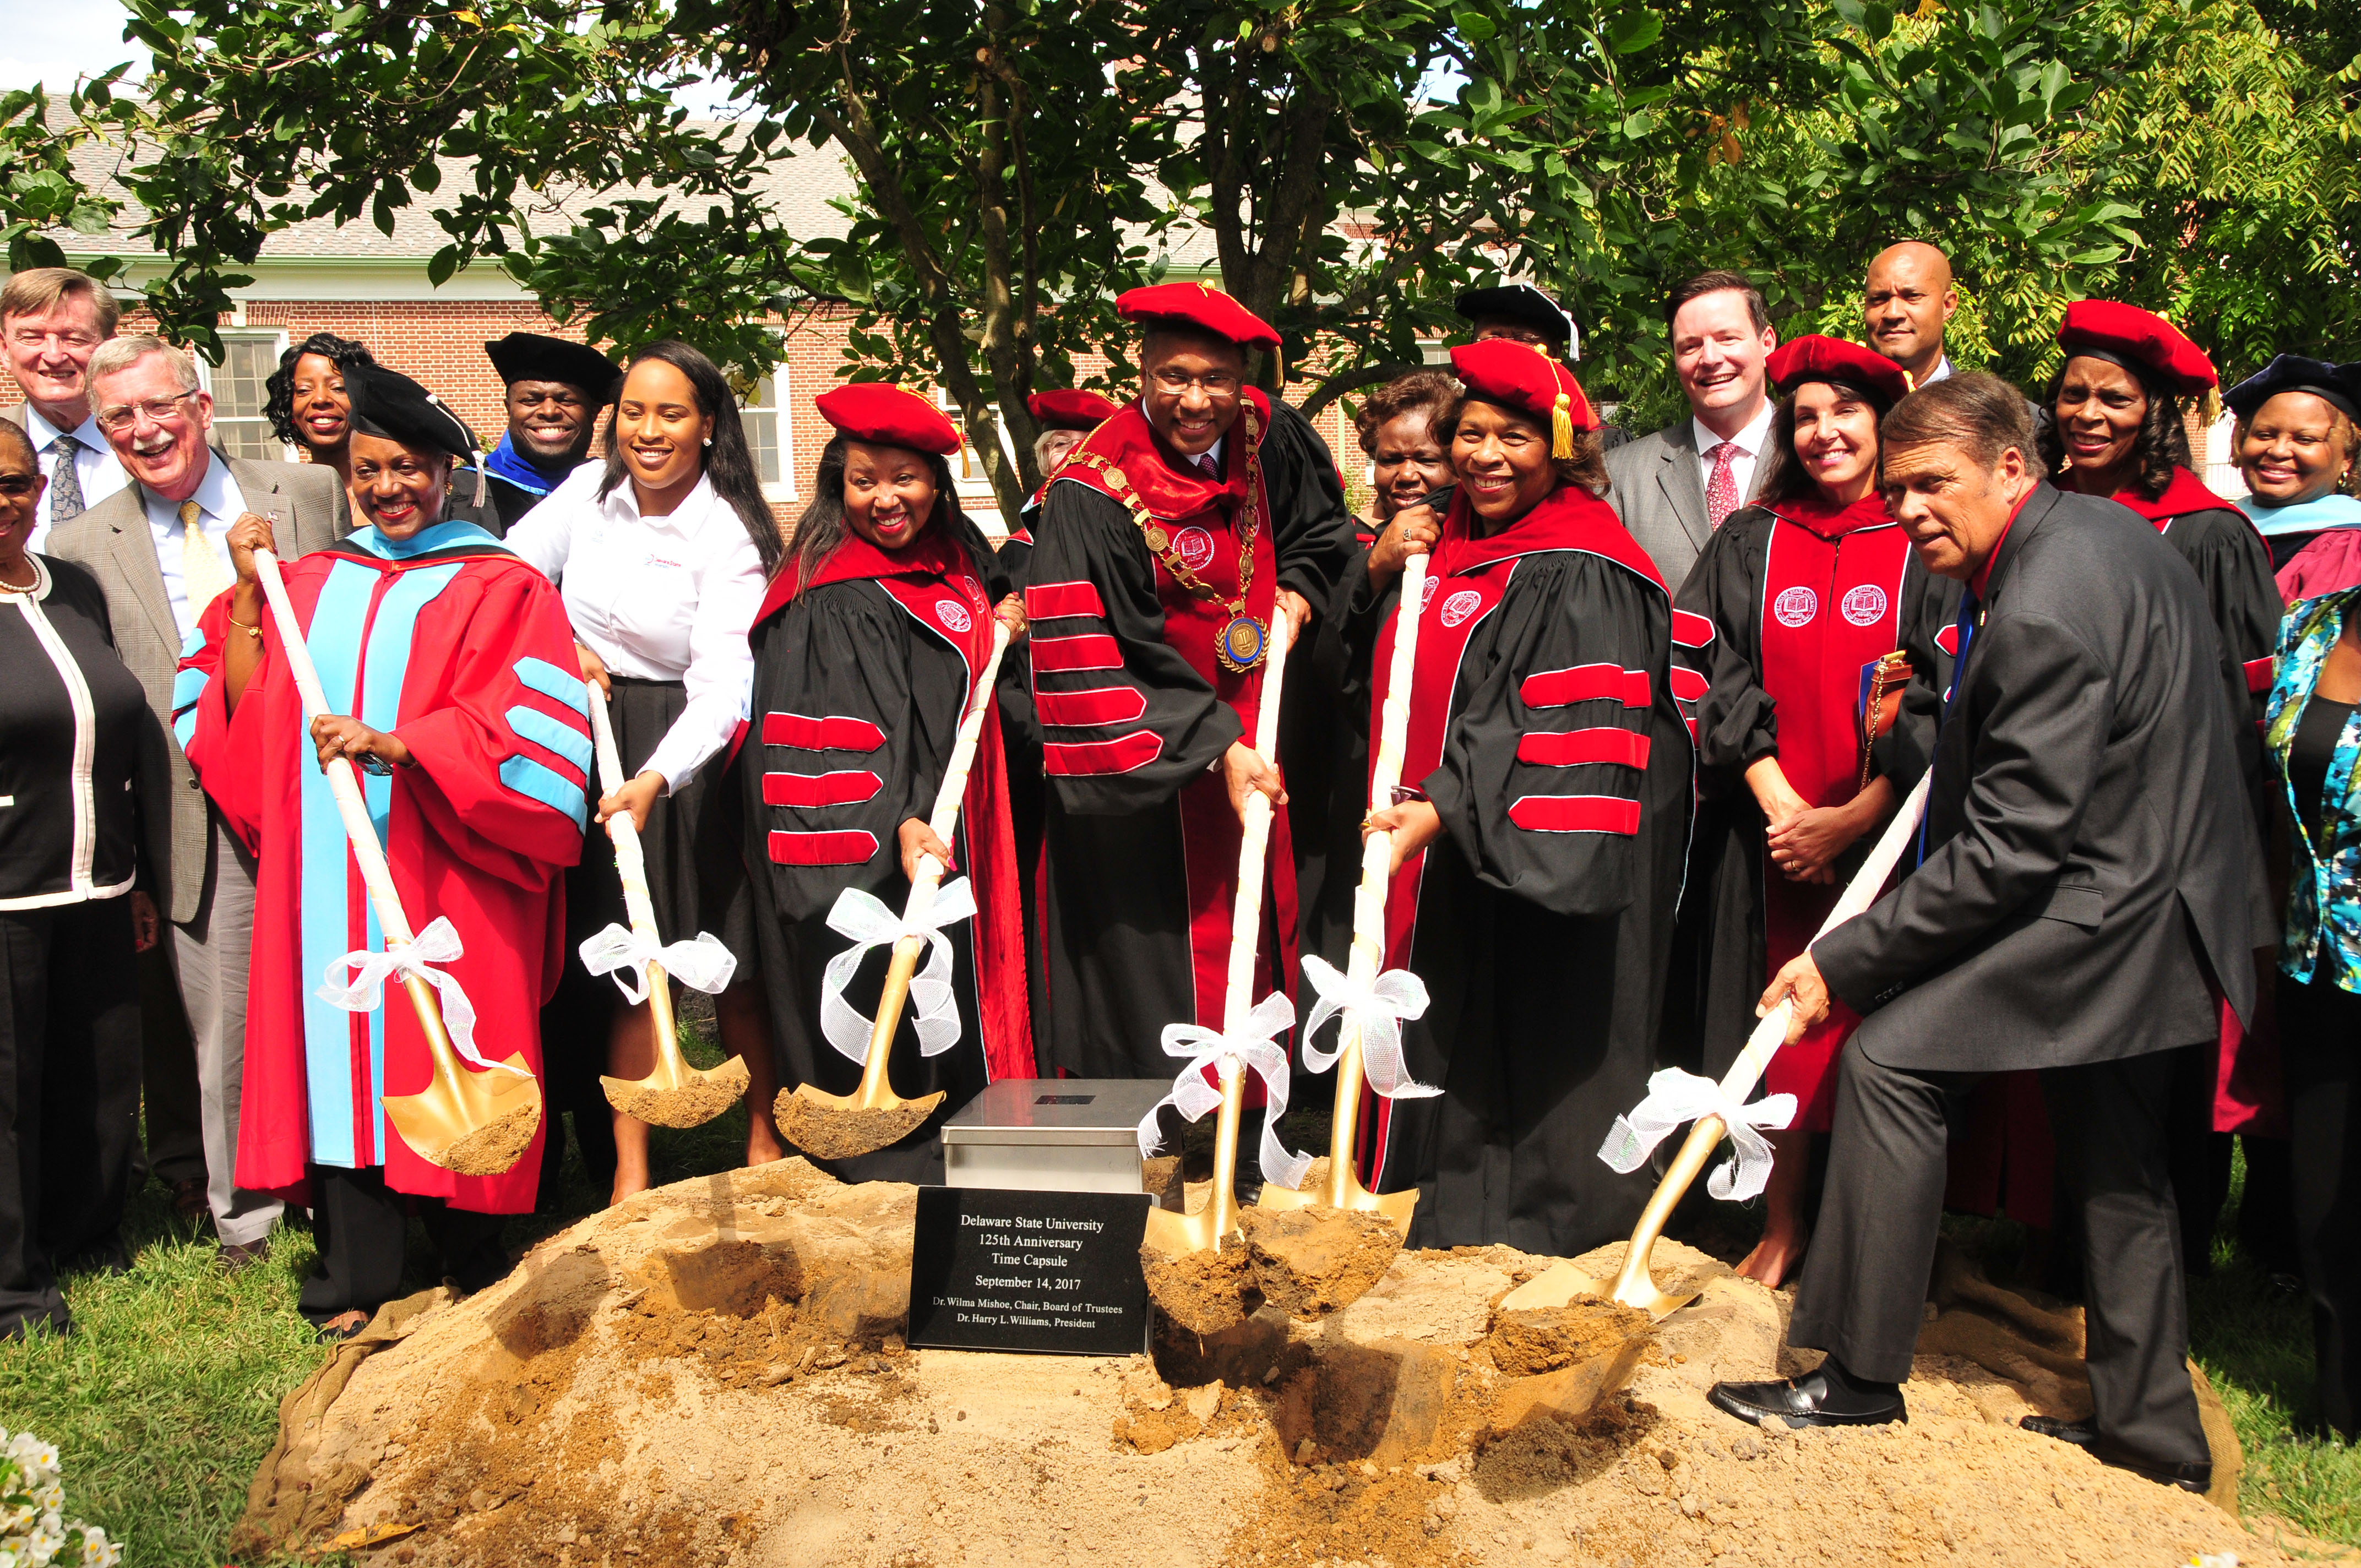 Holding shovels to begin burying the time capsule are (l-r) Dr. Vita Pickrum, VP of Institutional Advancement; SGA President Lackeeria Lewis; DSU Board Vice Chairwoman Devona Williams; DSU President Harry L. Williams; DSU Board Chairwoman Wilma Mishoe; and Dover Mayor Robin Christiansen.